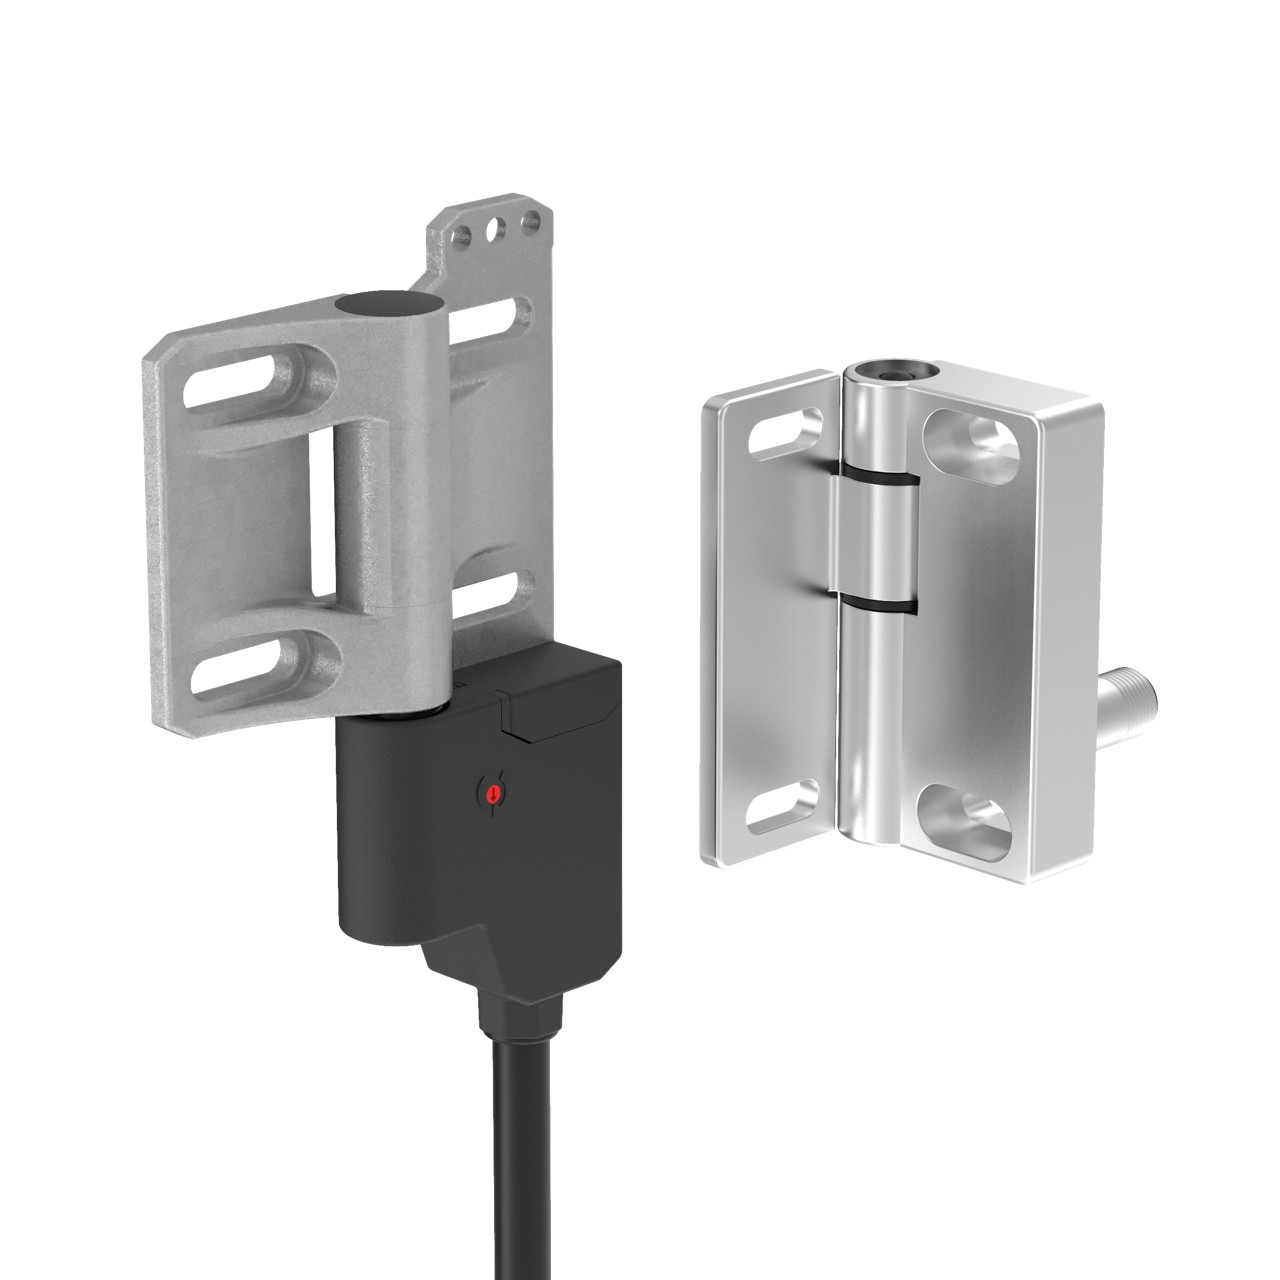 https://0201.nccdn.net/1_2/000/000/105/2d5/hinge-style-safety-interlock-switches.img.png